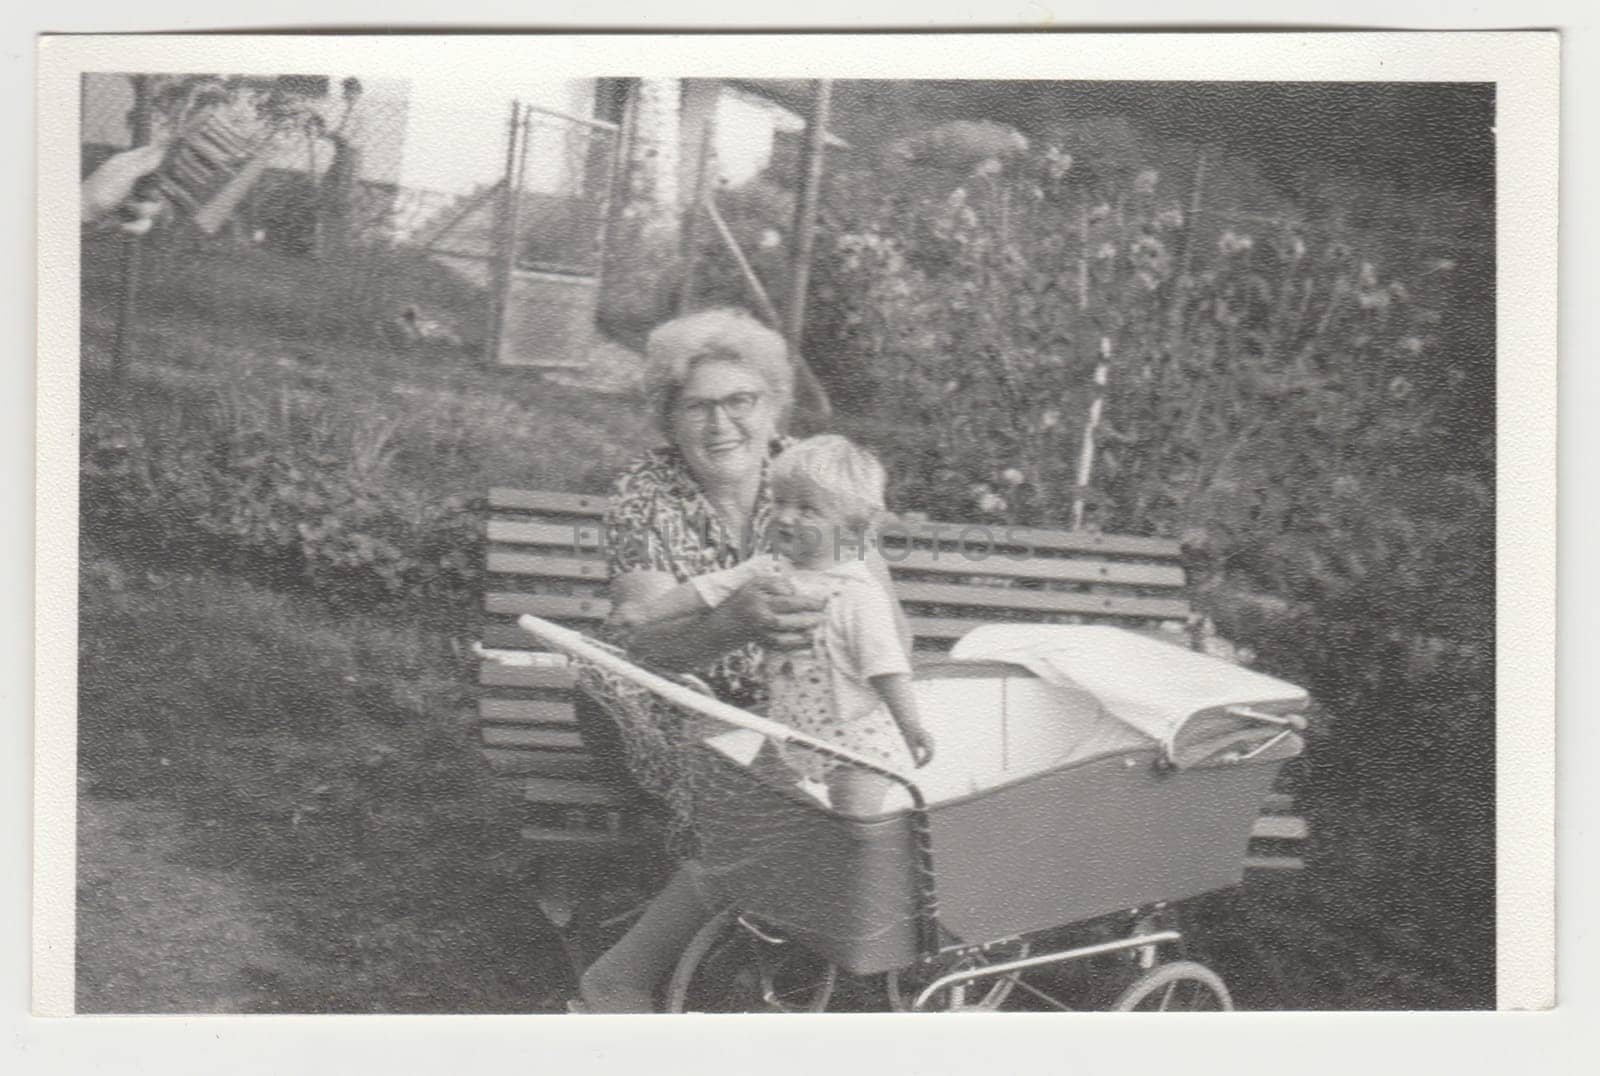 THE CZECHOSLOVAK SOCIALIST REPUBLIC - CIRCA 1970s: Vintage photo shows grandmother holds a toddler in the pram - carriage. Retro black and white photography. Circa 1980s.